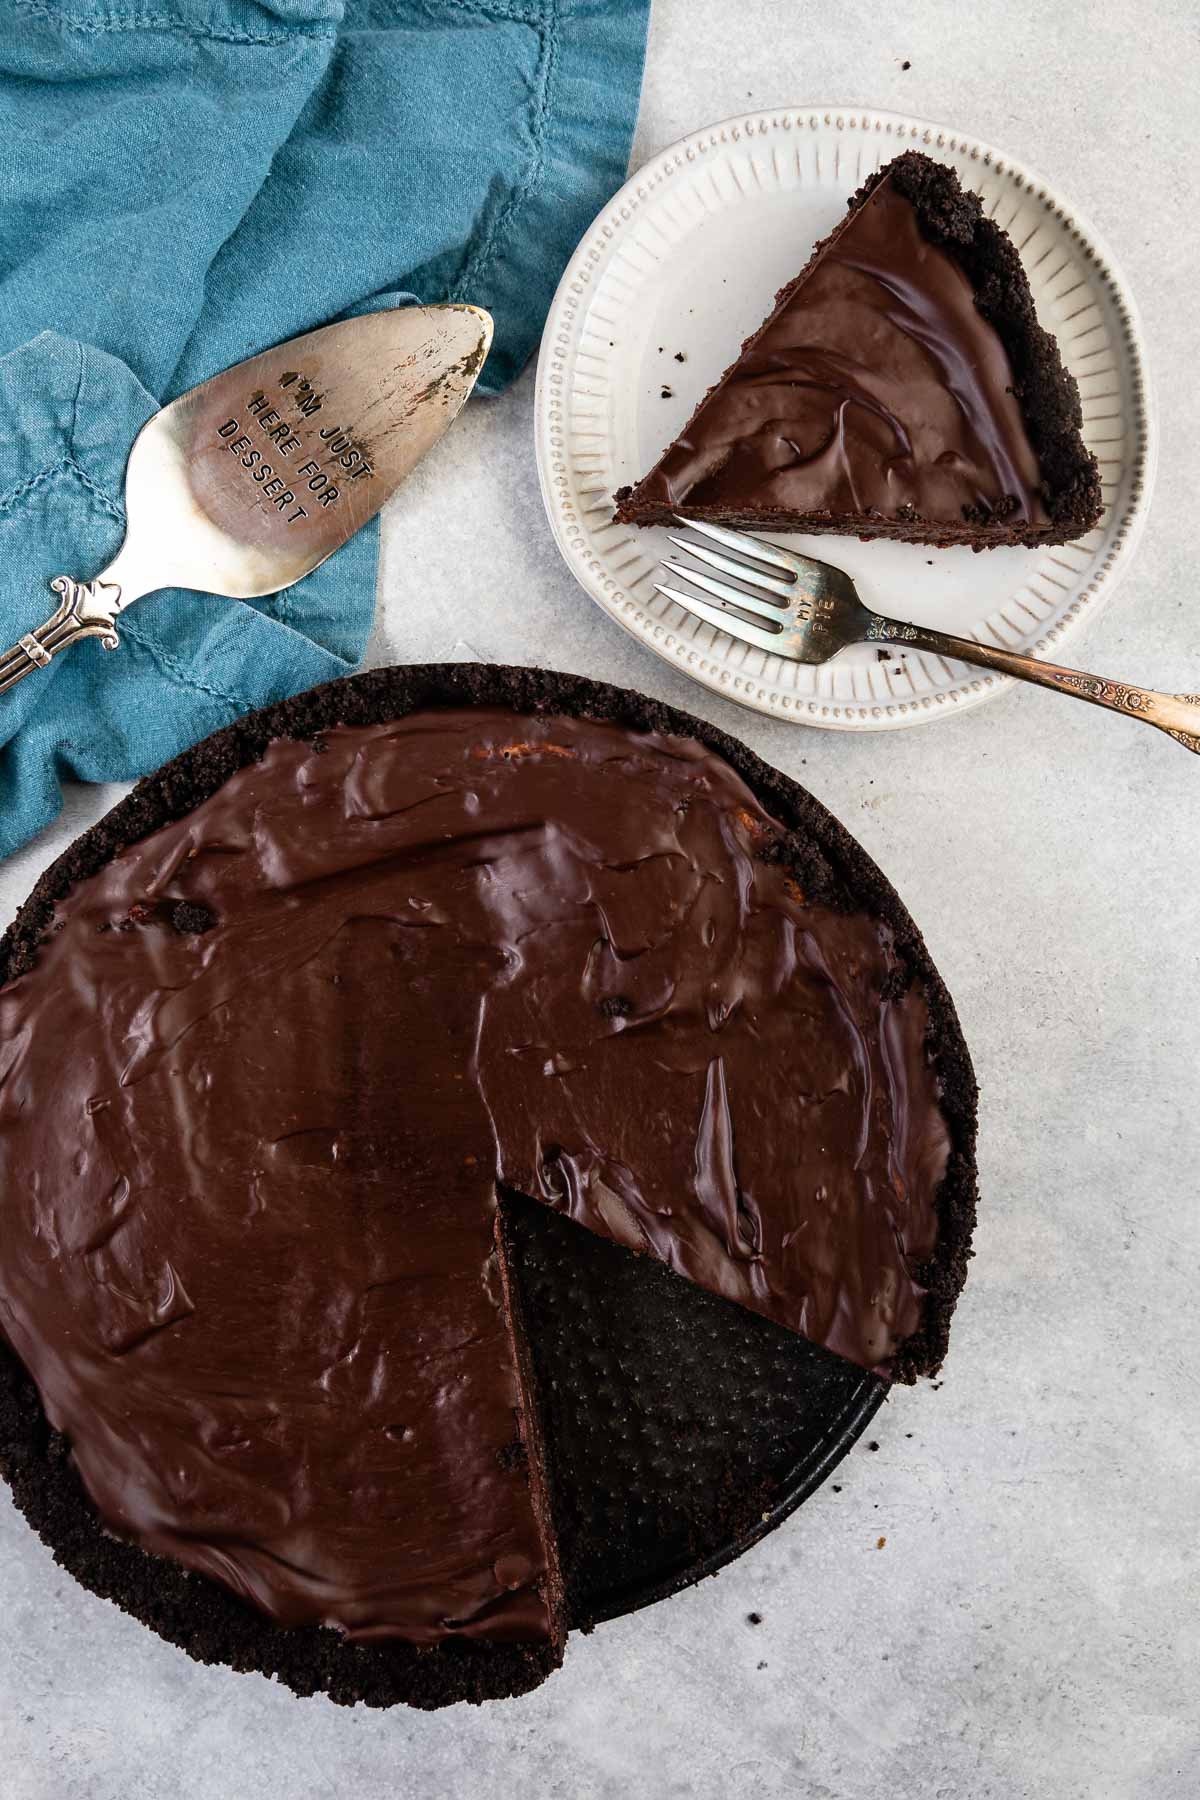 Overhead shot of mississippi mud pie with one slice on a plate next to rest of pie